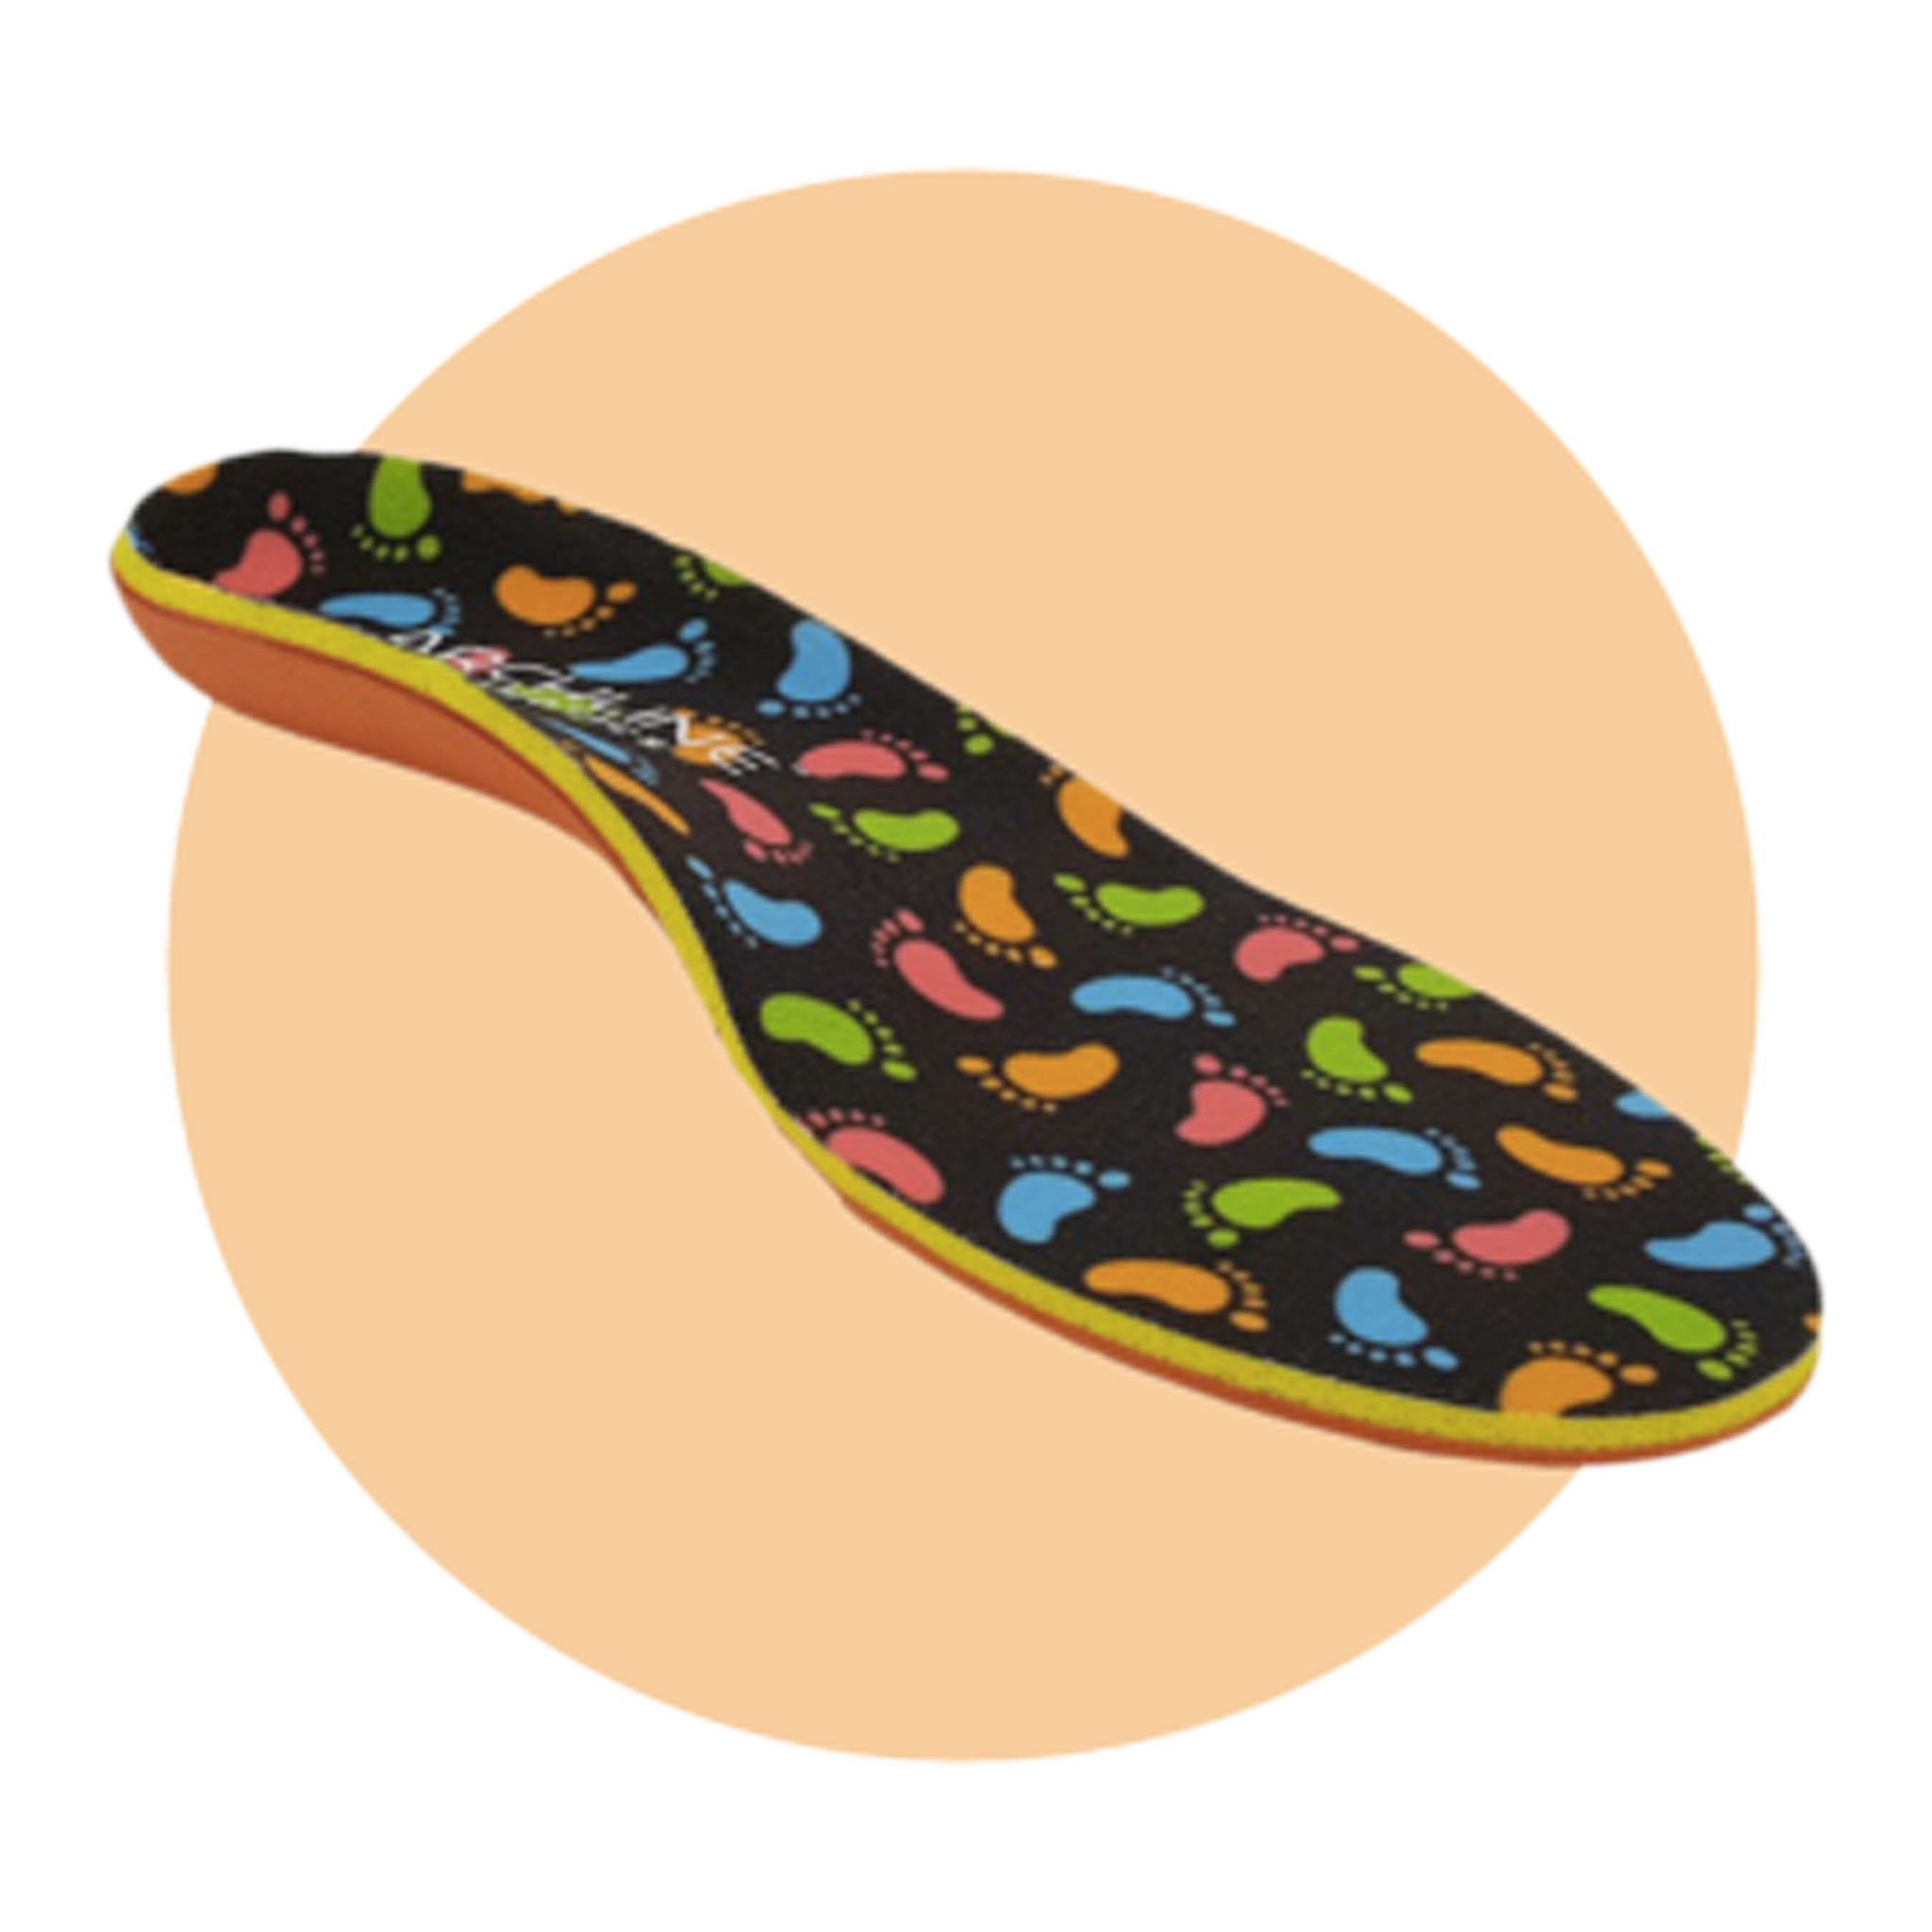 Archline Kid Insole -$69